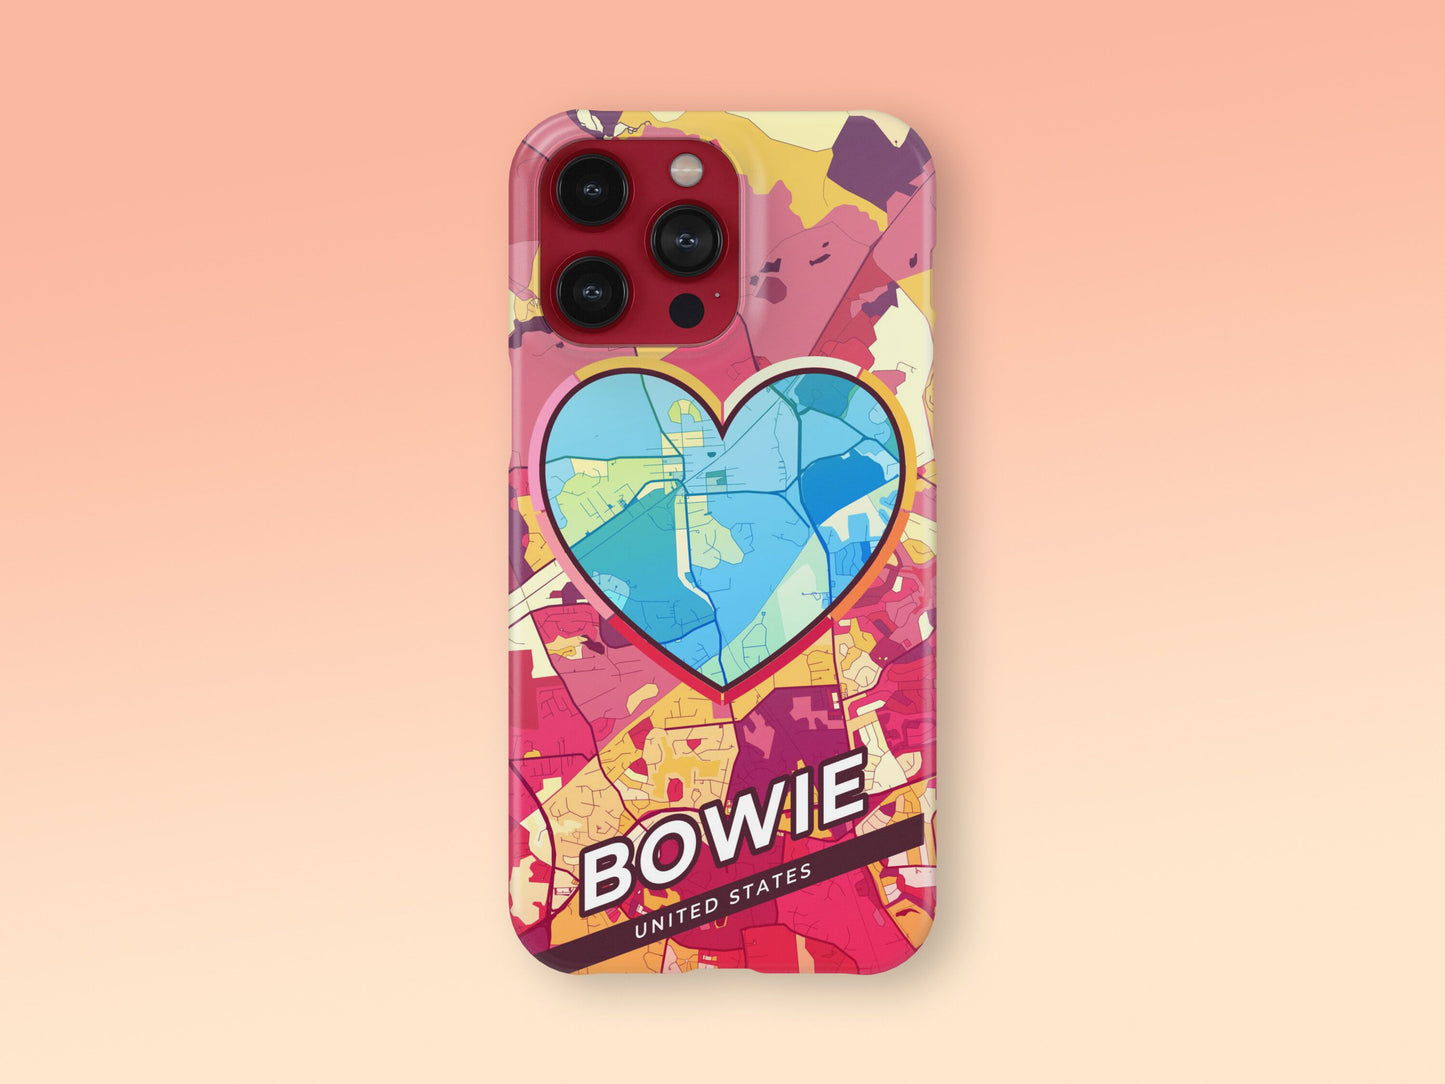 Bowie Maryland slim phone case with colorful icon. Birthday, wedding or housewarming gift. Couple match cases. 2